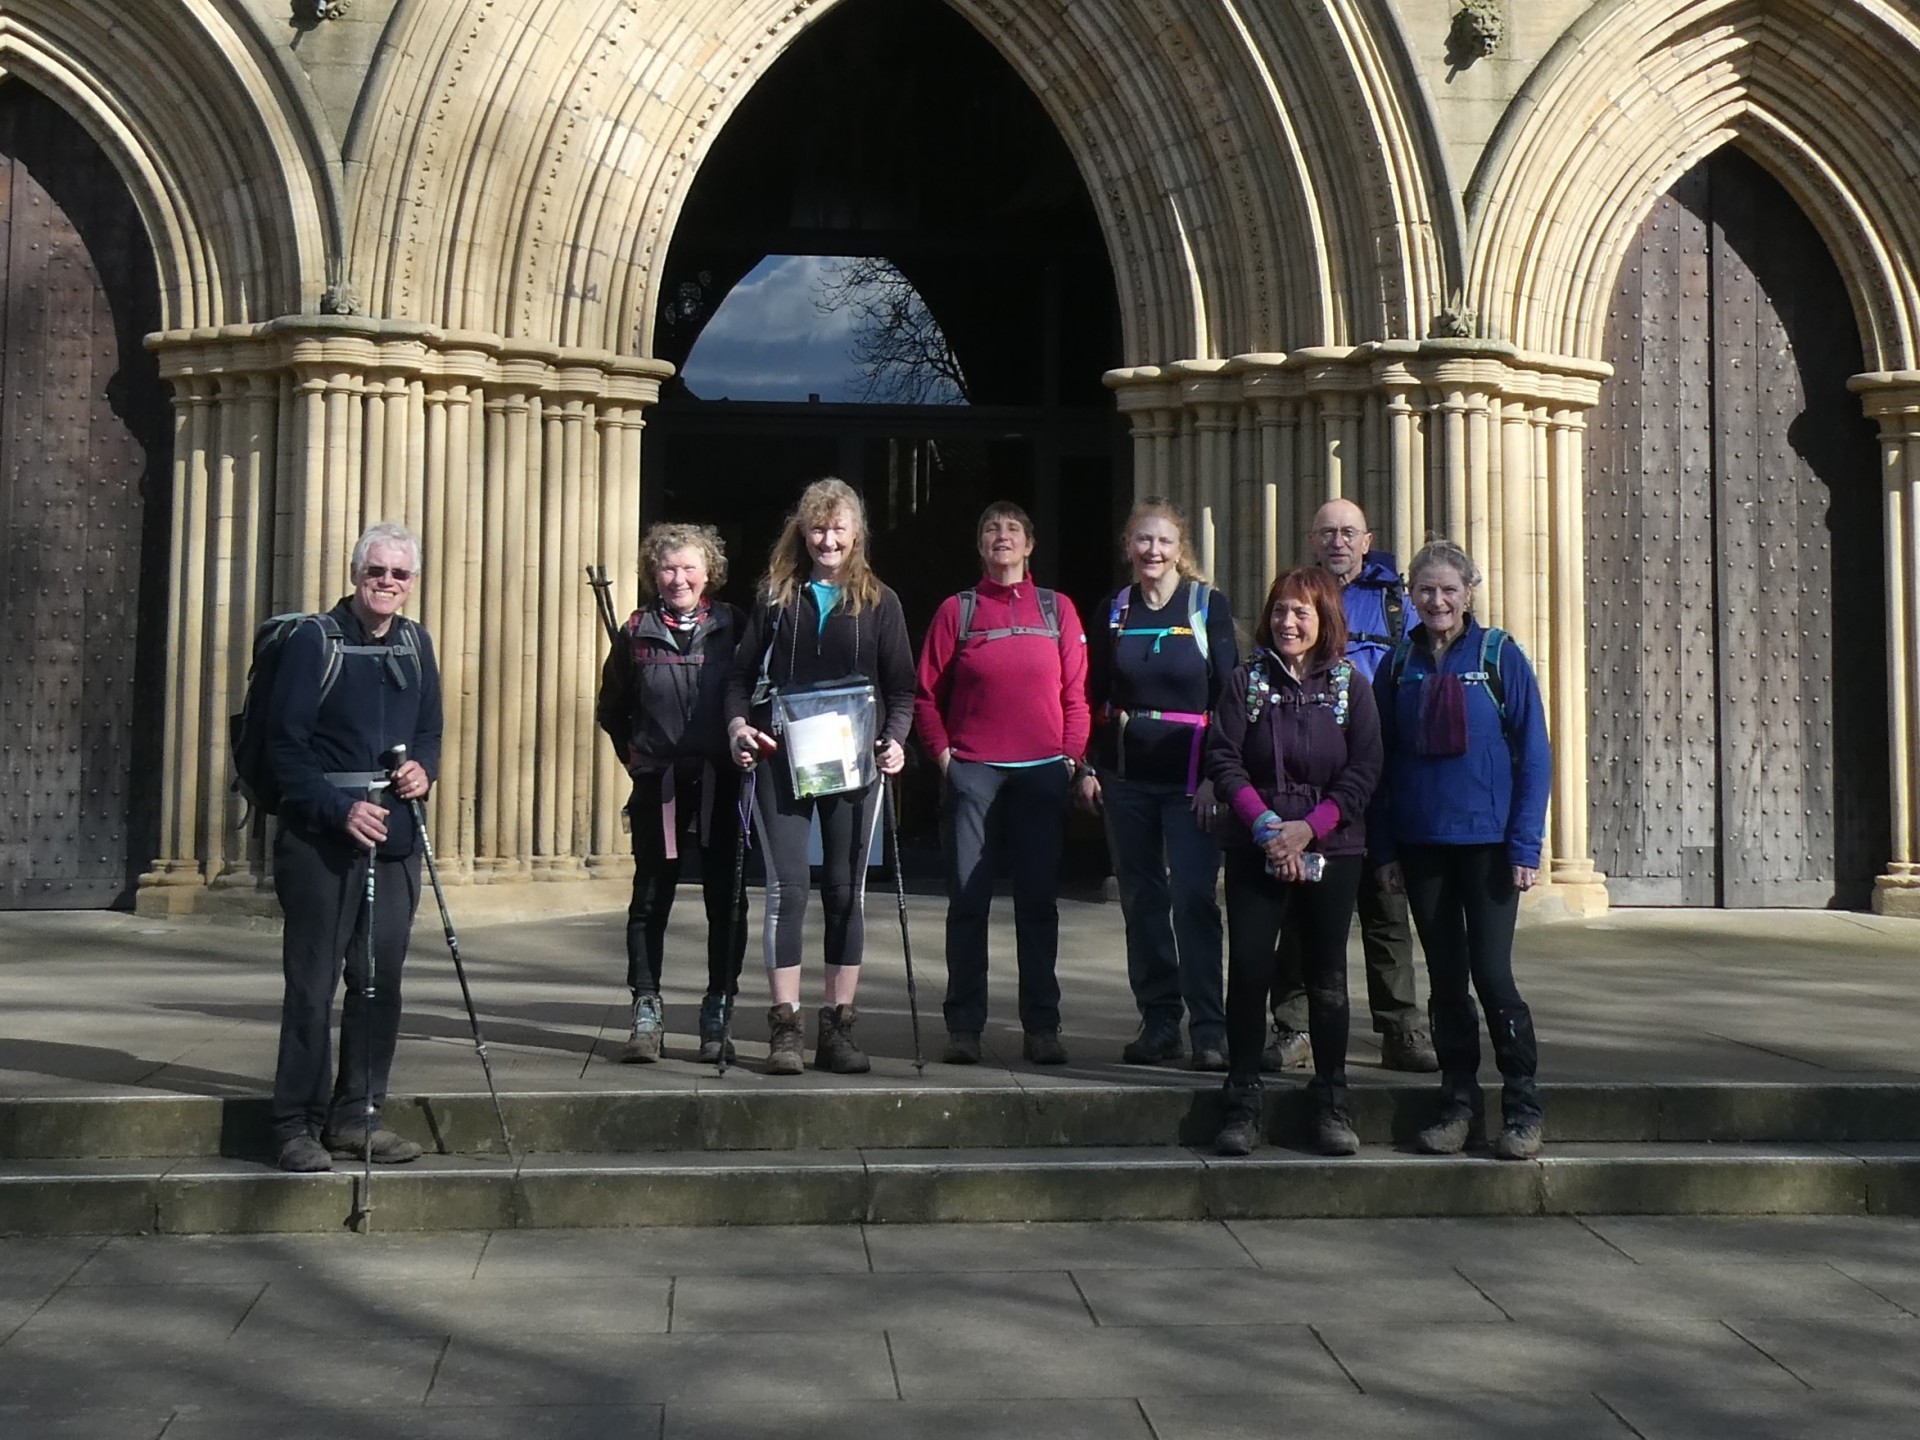 Group outside Ripon Cathedral on Completion of the Yorkshire Heritage Trail.